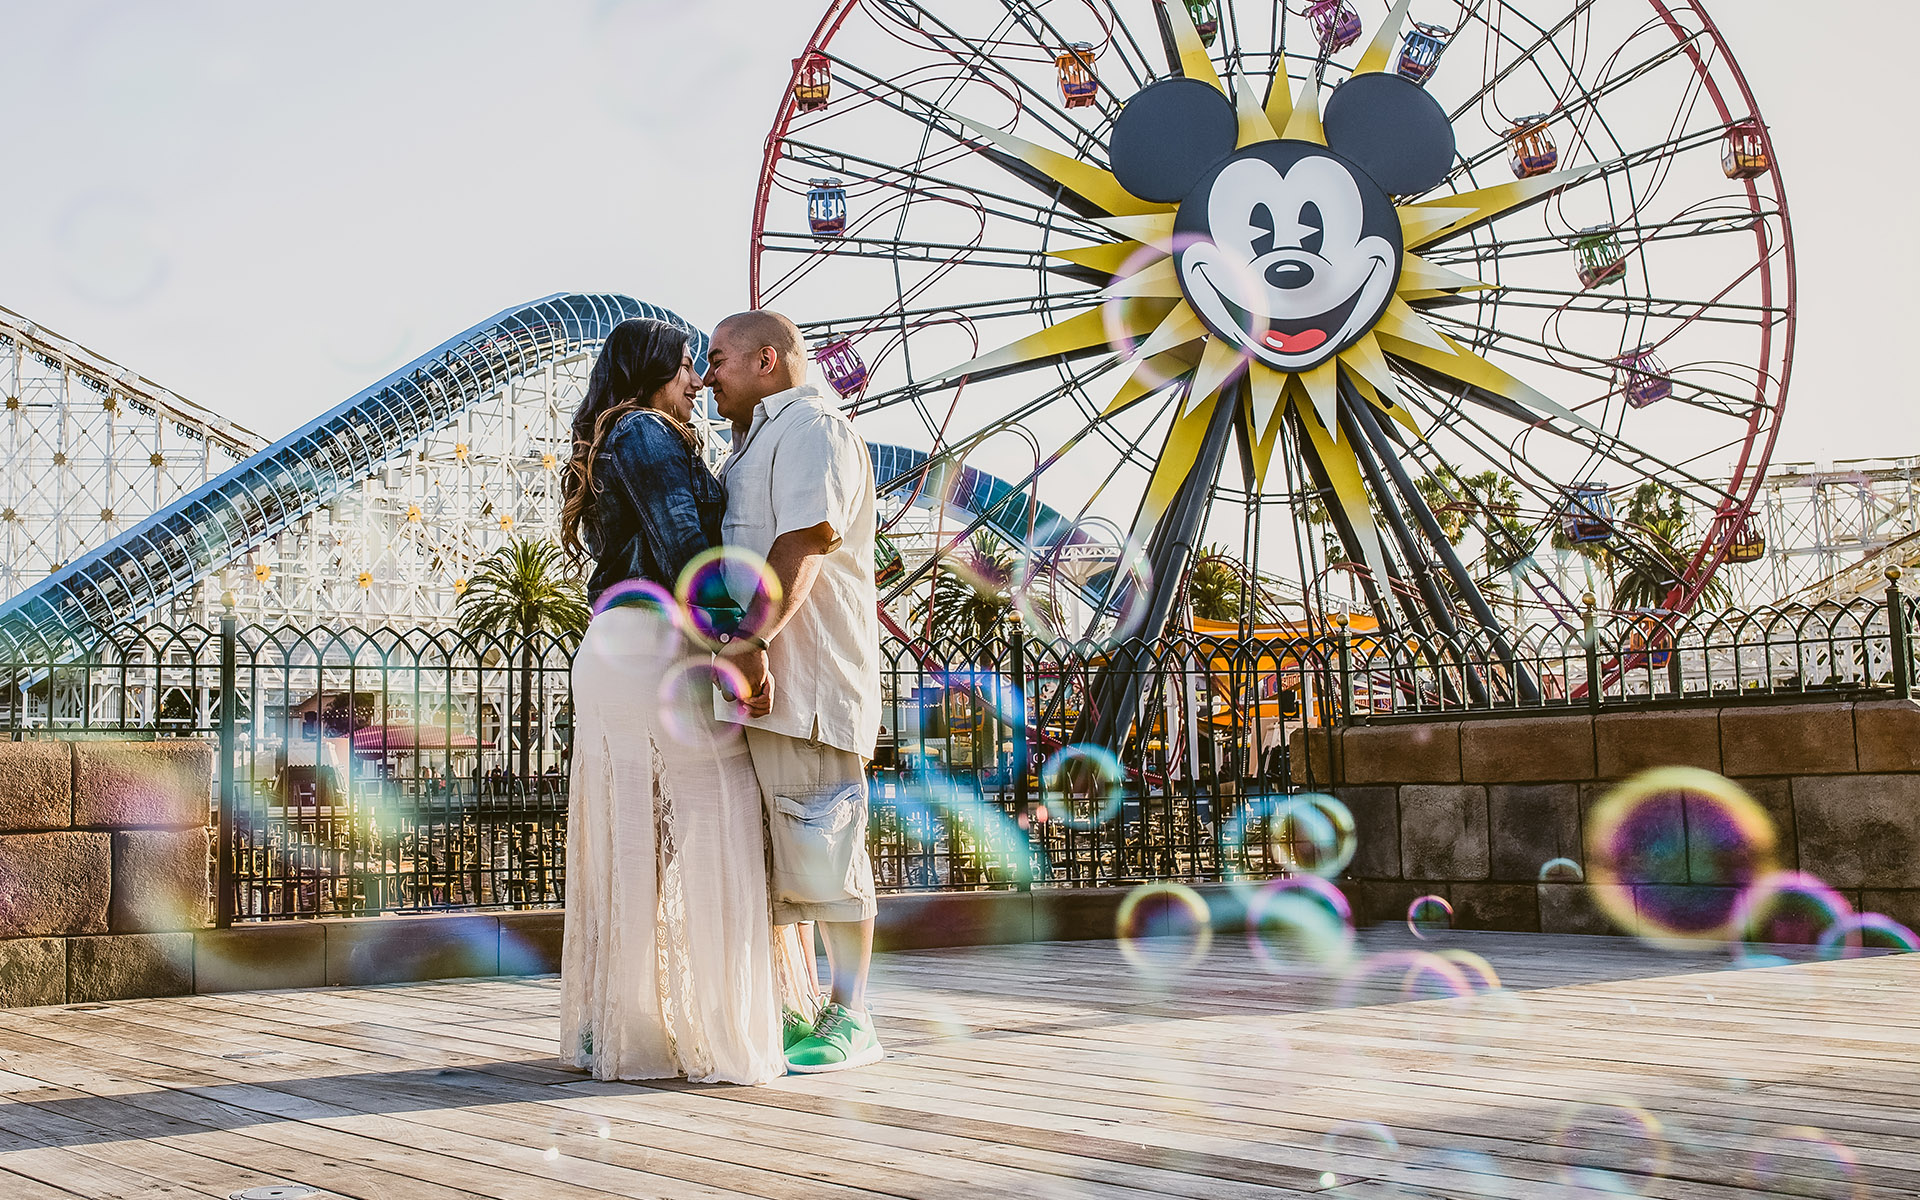 engagement at disneyland with bubbles california adventure mickey mouse ferris wheel